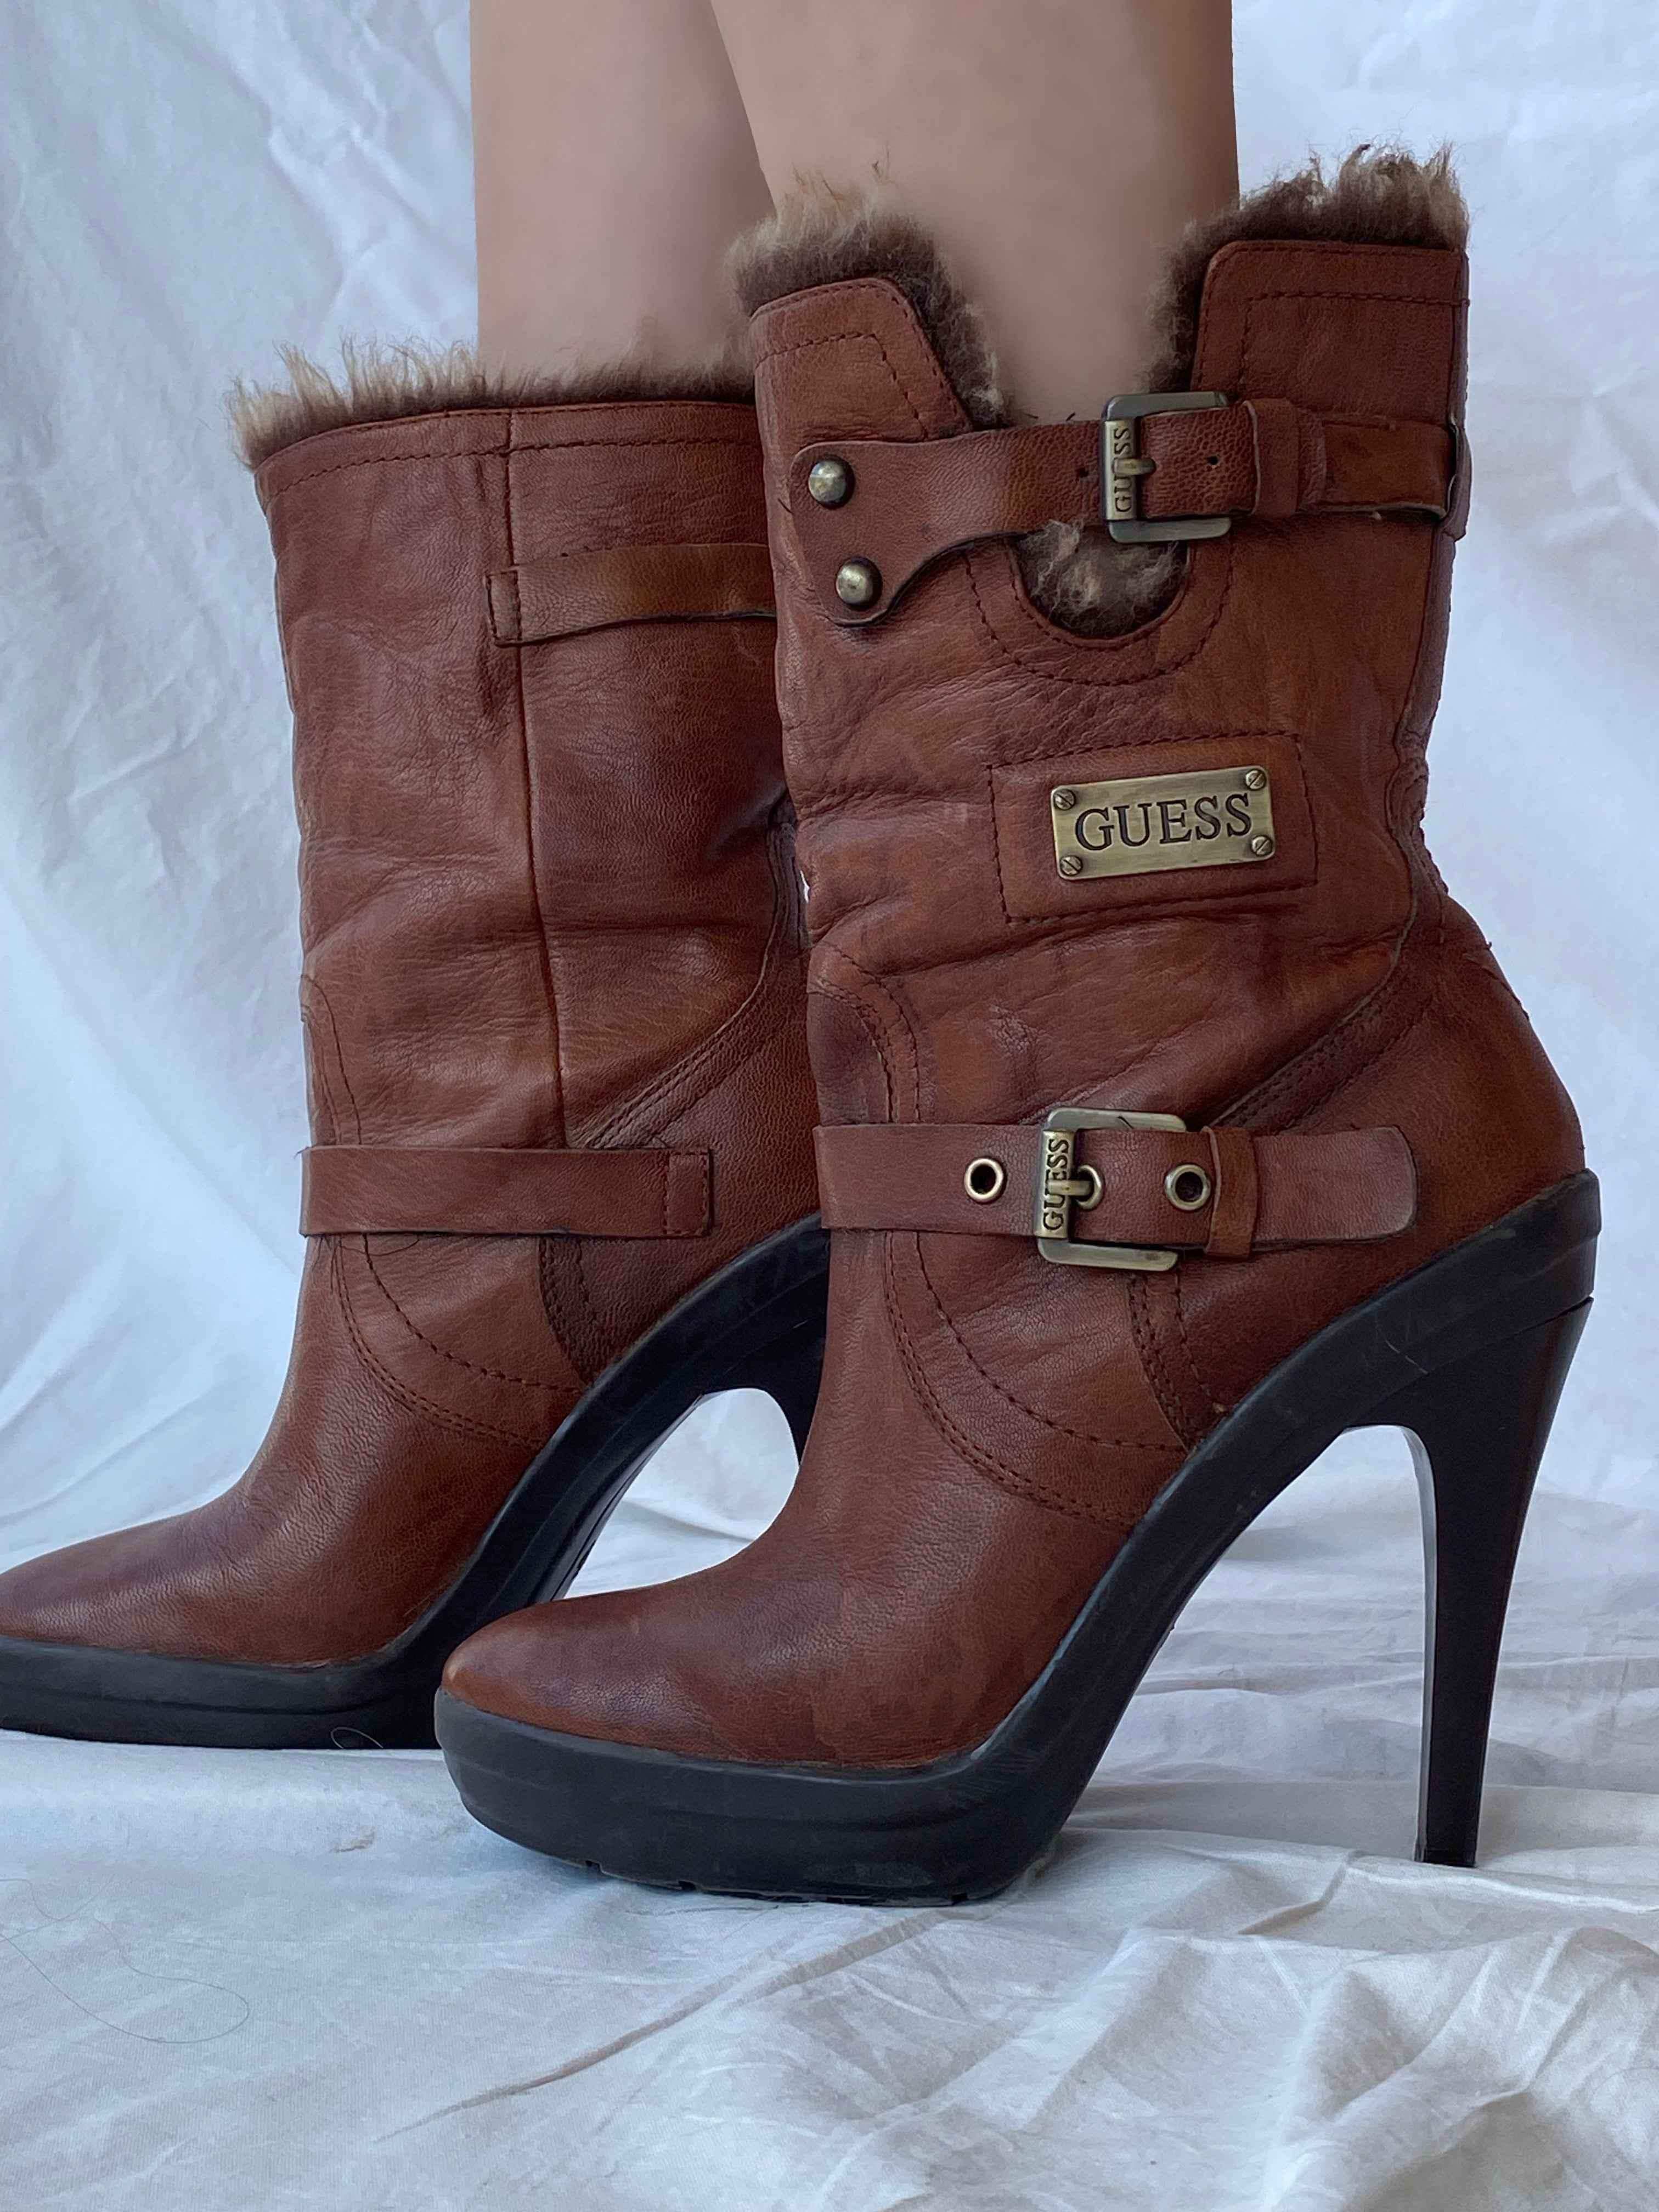 Vintage Y2K Guess Boots - Balagan Vintage Boots 00s, 90s, guess